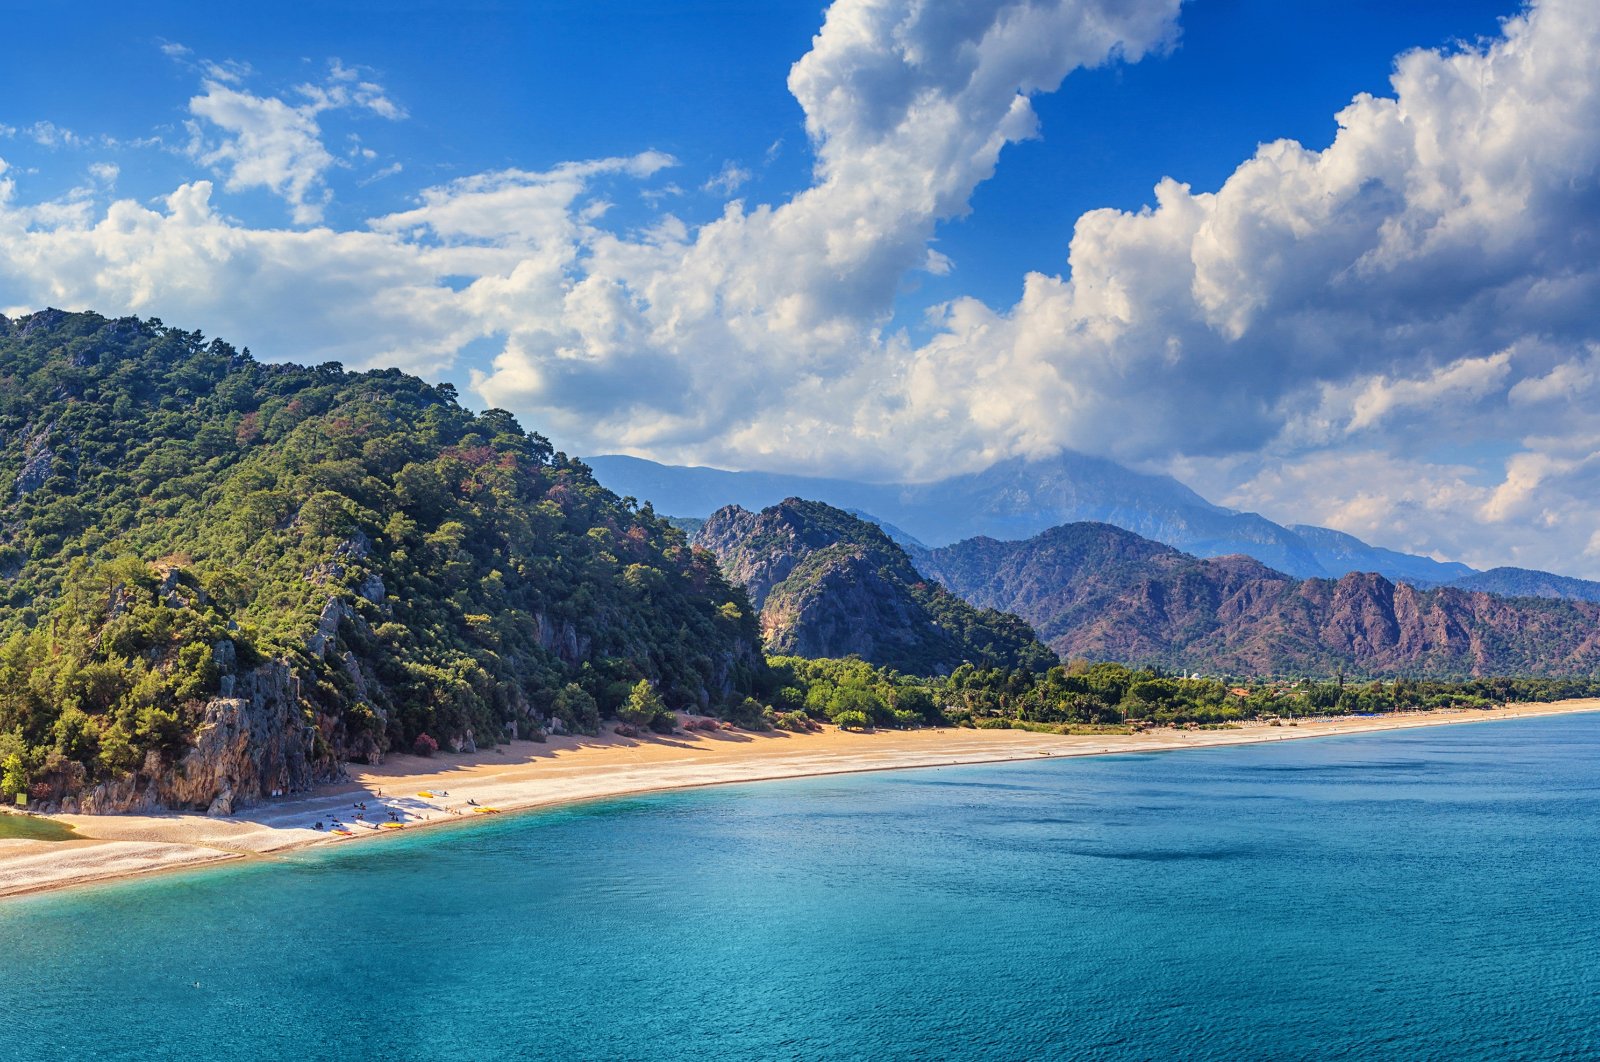 Time for some sun: Turkey's 10 most beautiful beaches | Daily Sabah